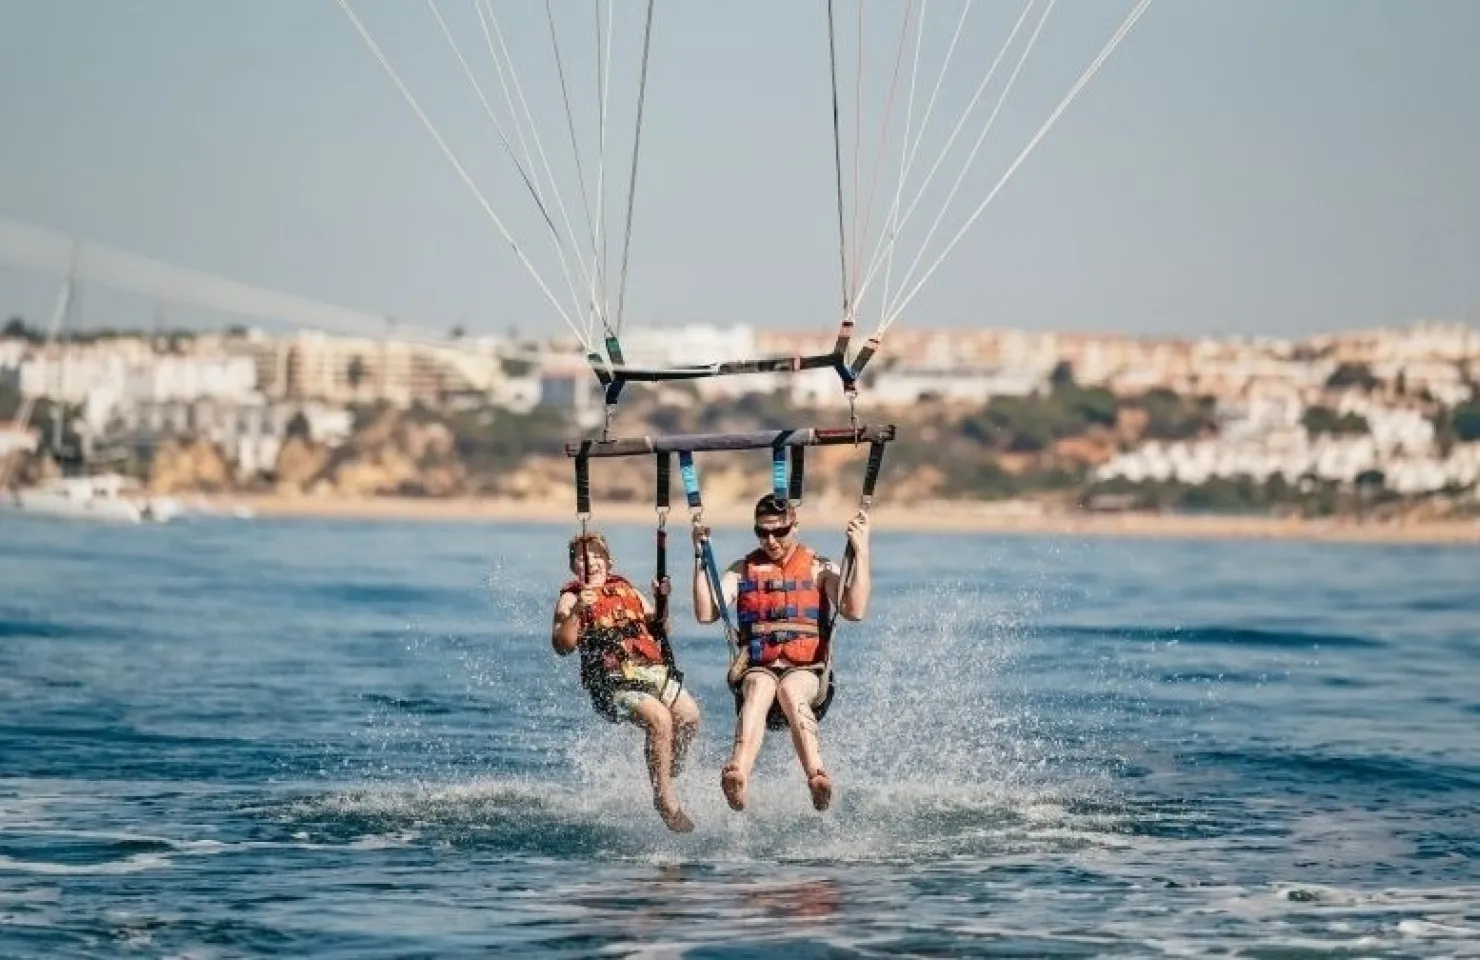 Dream Wave Parasailing - Family Activities in Albufeira